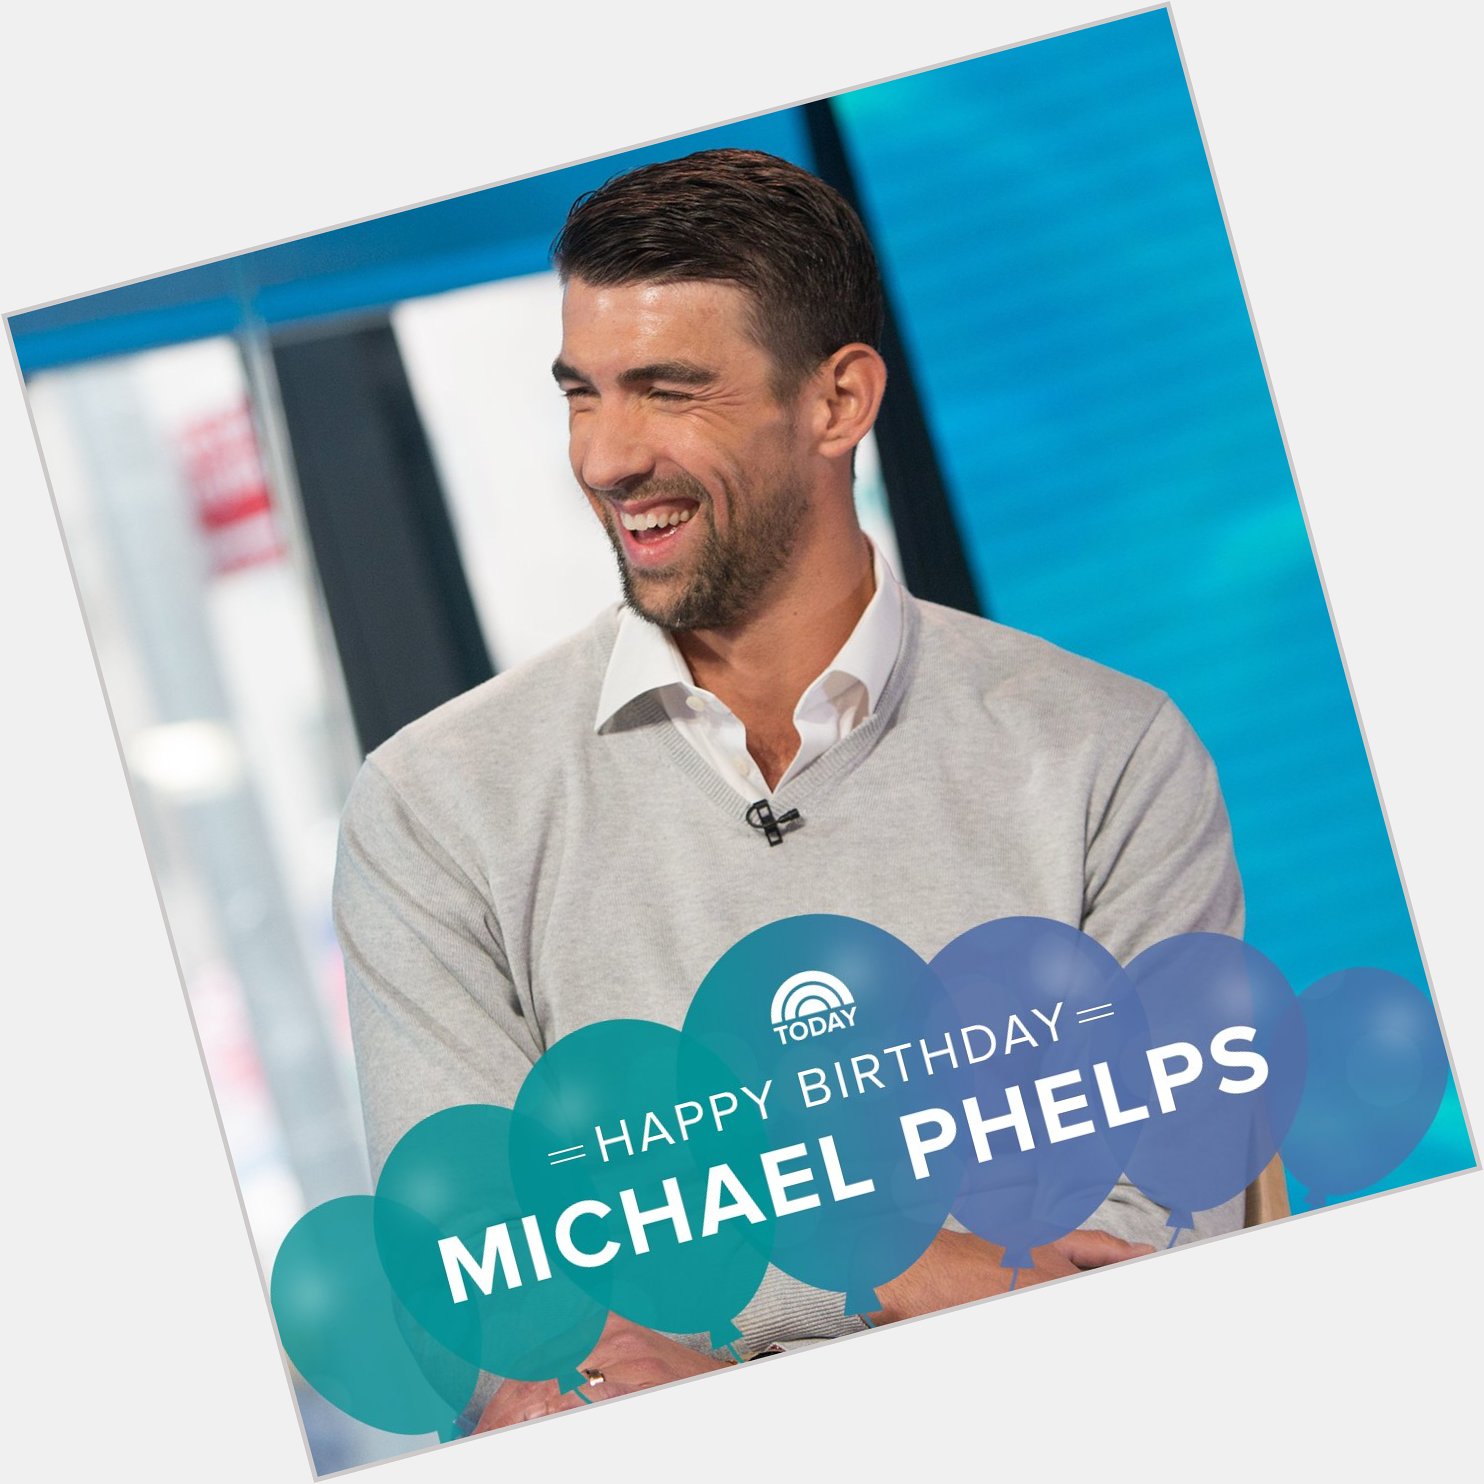 Happy birthday to the most decorated Olympian of all time, Michael Phelps! 